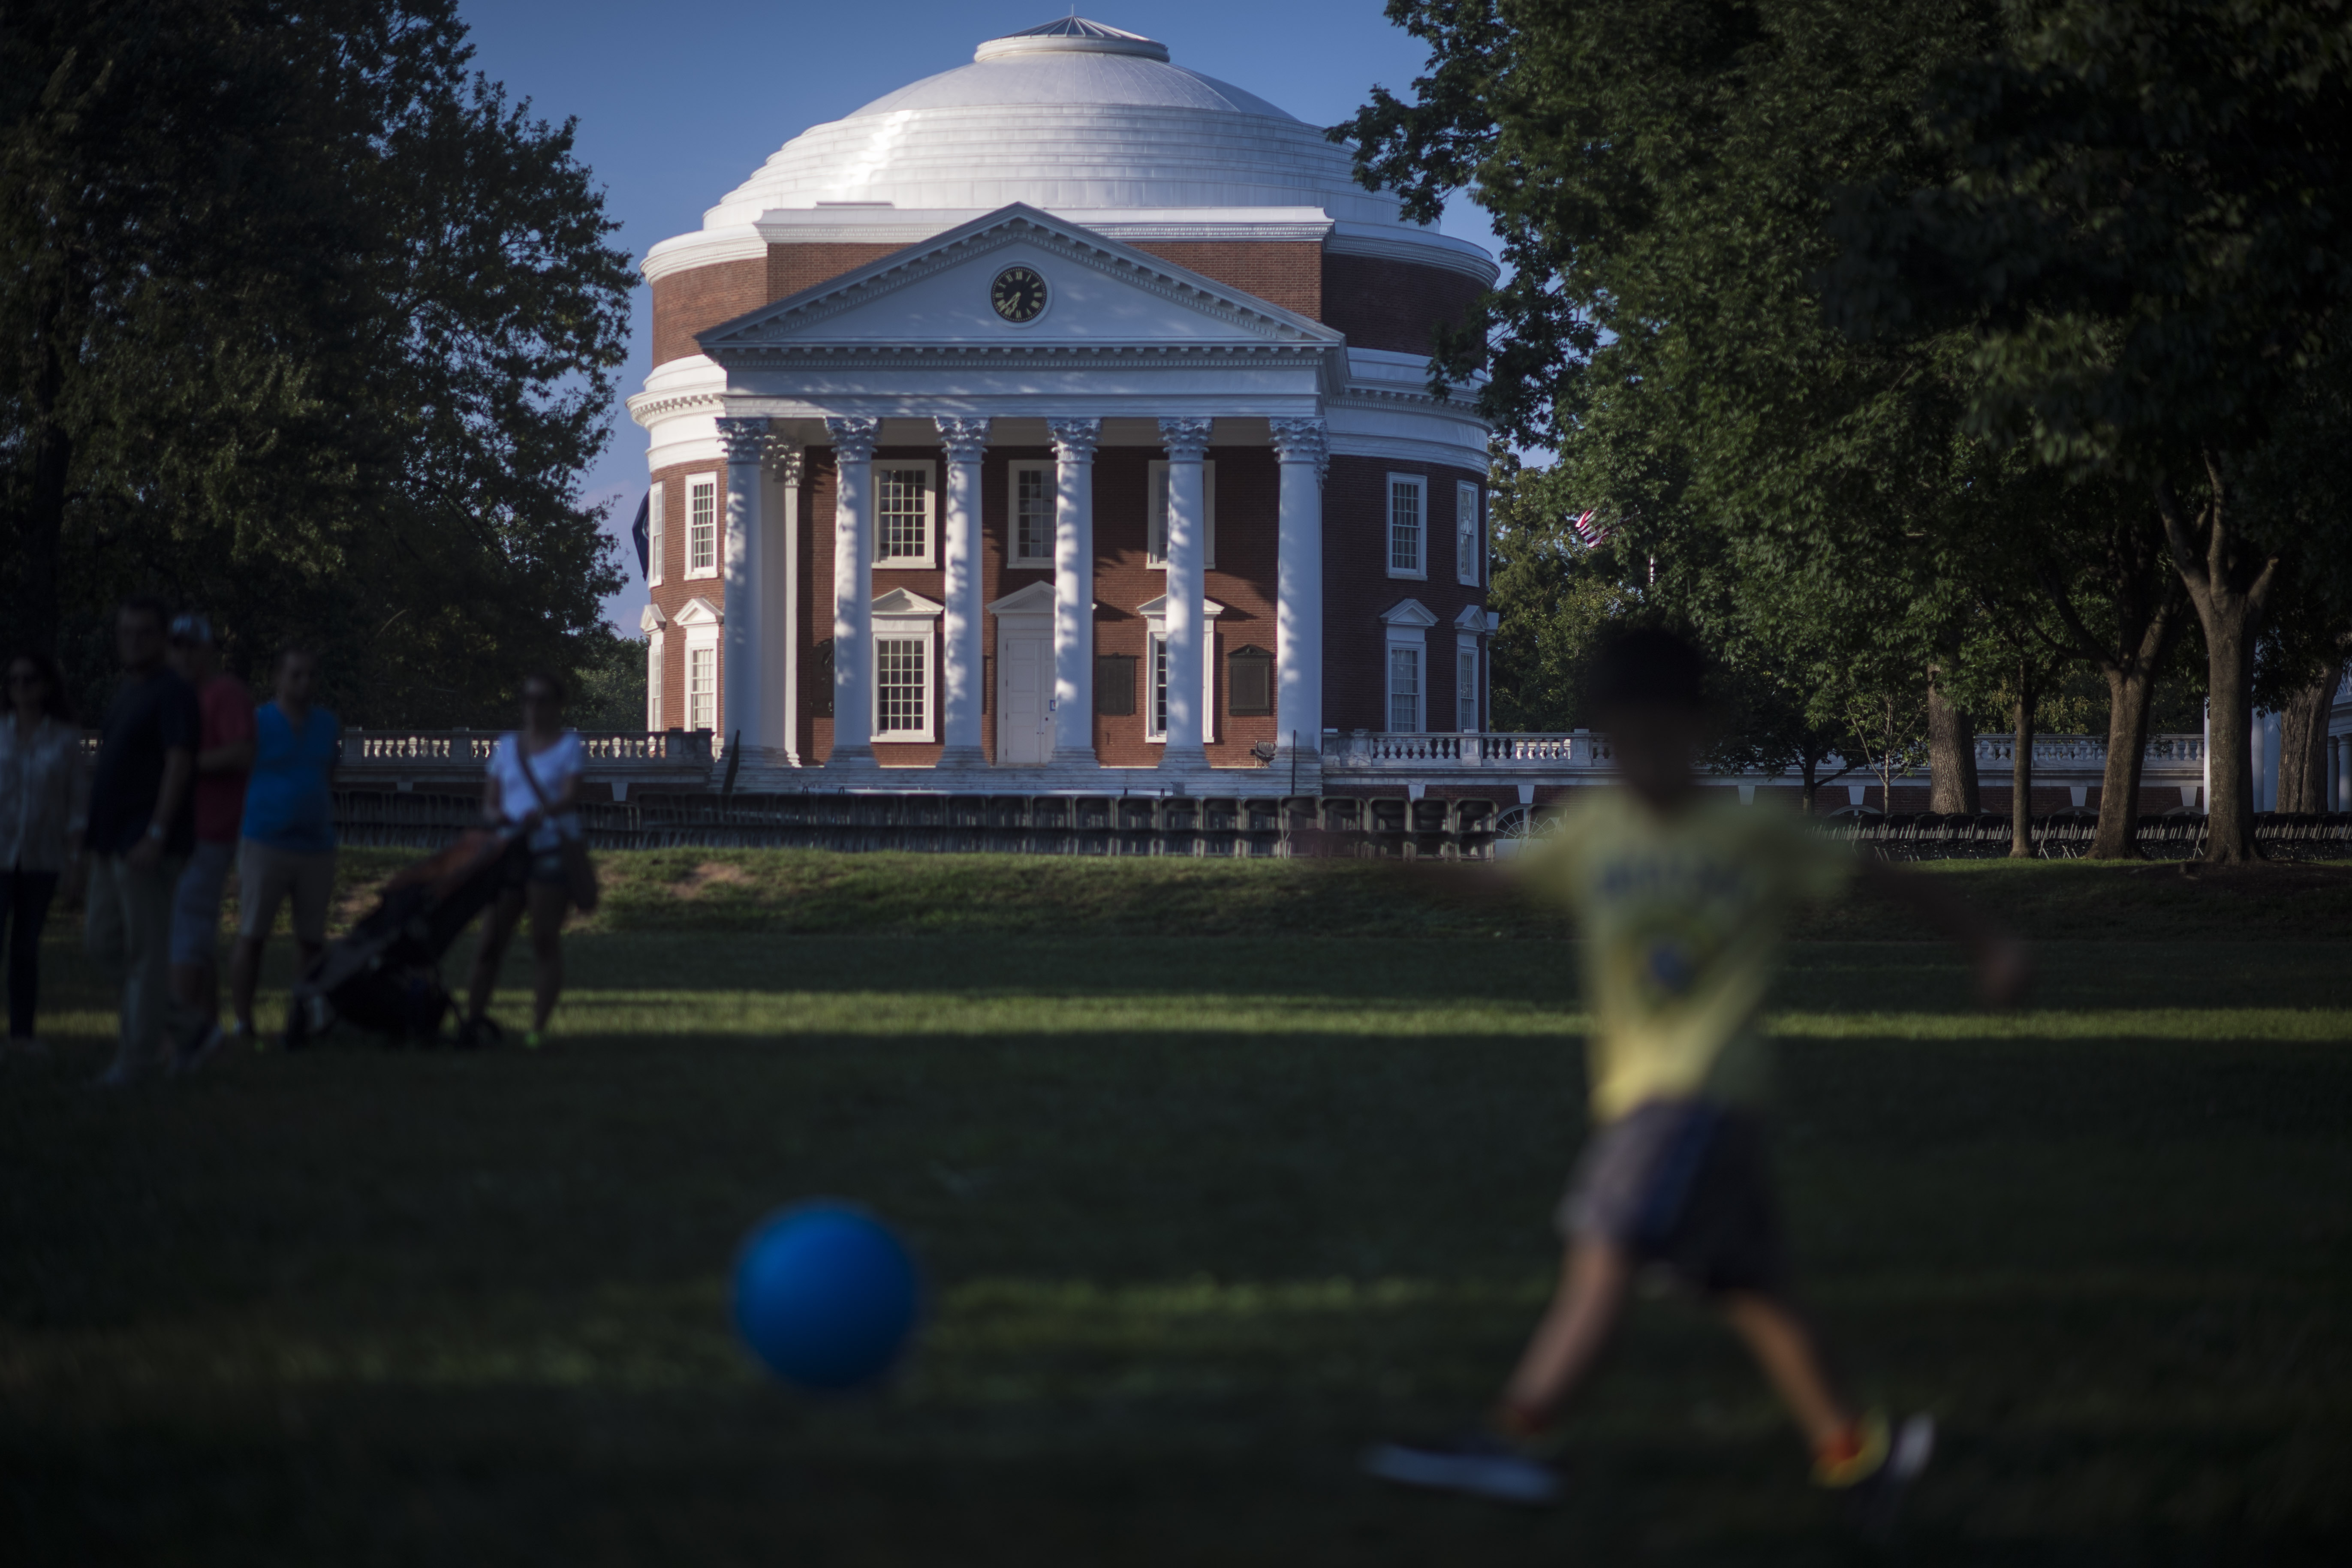 UVA is known for the ‘Block Party,’ a packed and usually drunken party weekend that has resulted in sexual assaults and other incidents. This year the school is counter-programming, offering a concert, food truck festival and more to keep students out of t